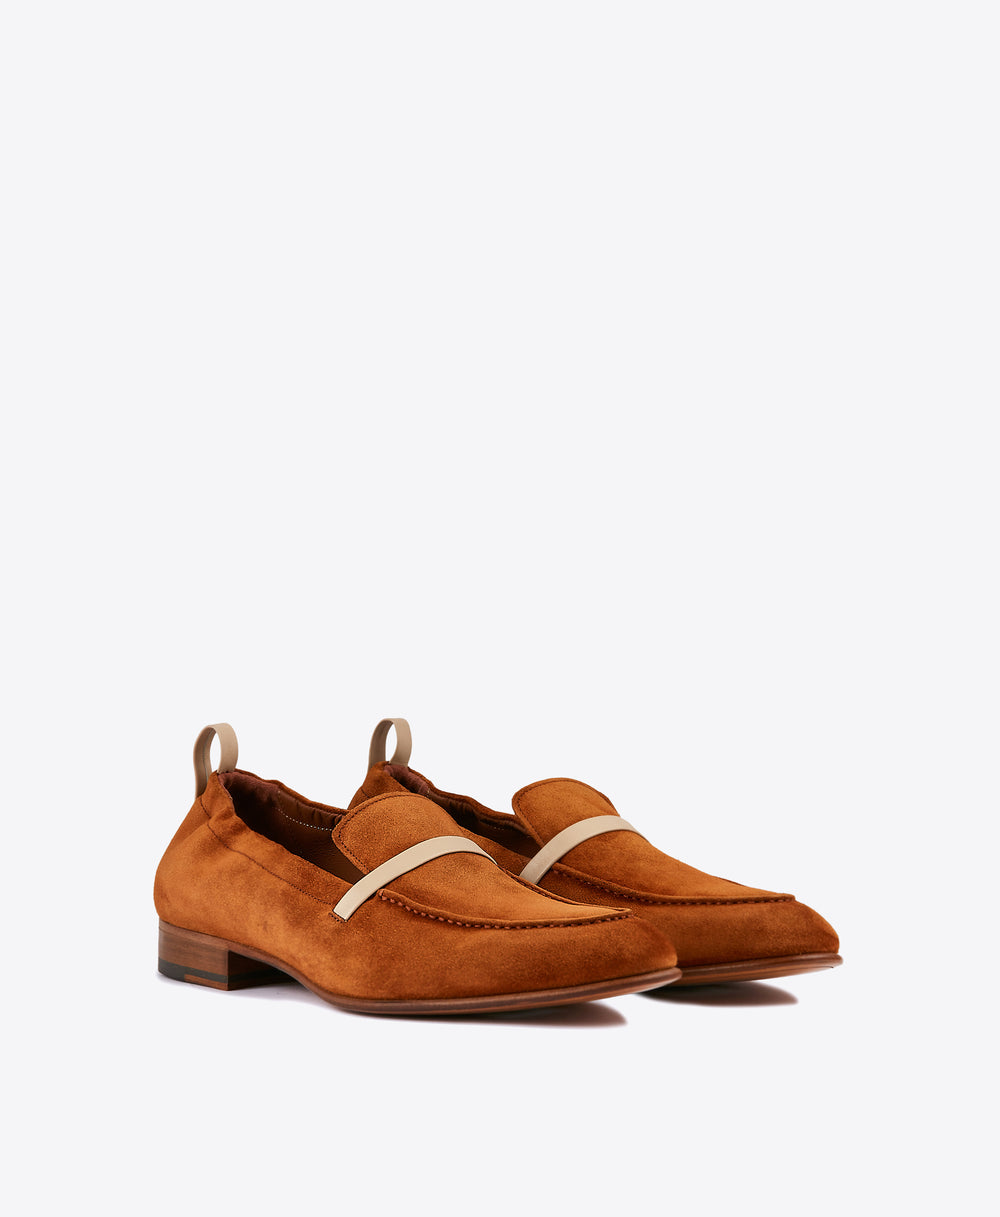 Men's Malone Souliers Caramel Brown Suede Loafers